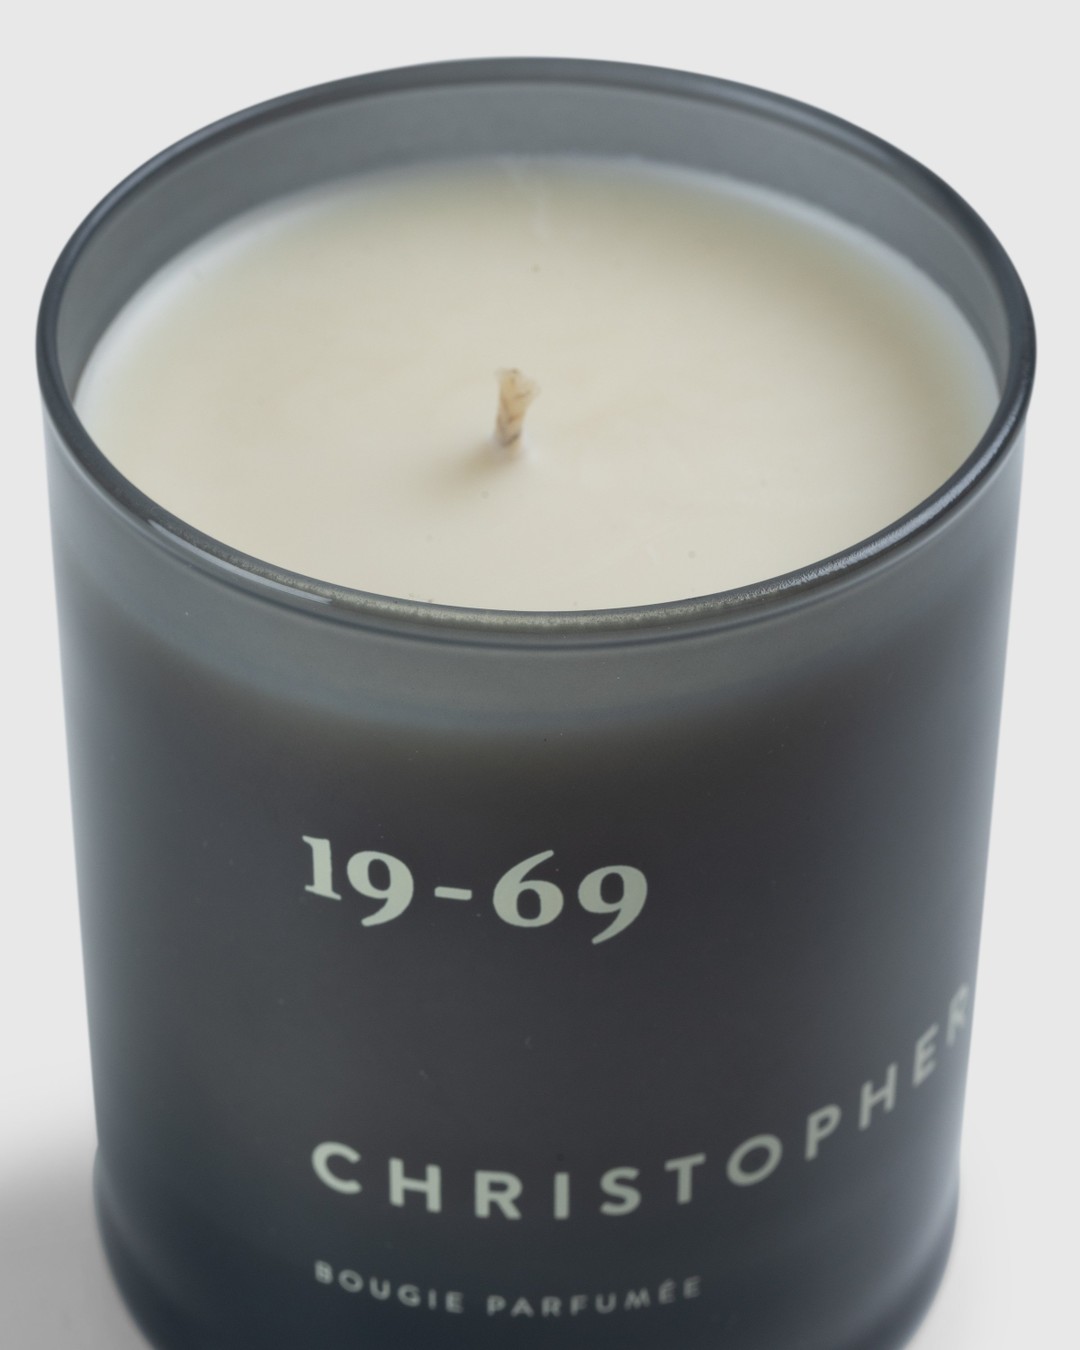 19-69 – Christopher BP Candle - Candles - Grey - Image 3